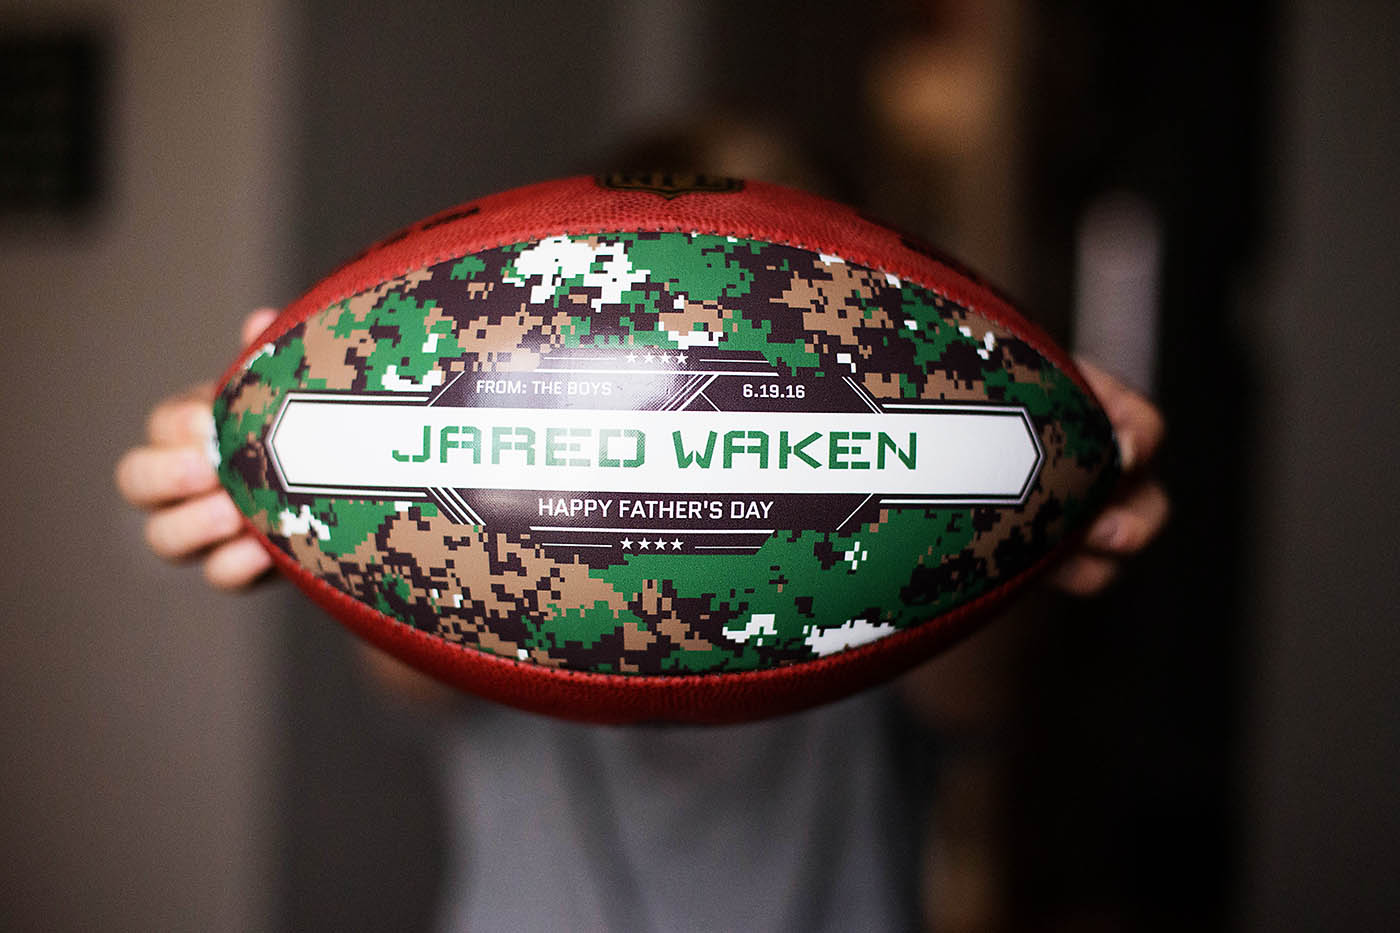 Father's Day gift + breakfast in bed perfect for any dad. LOVE the personalized football!